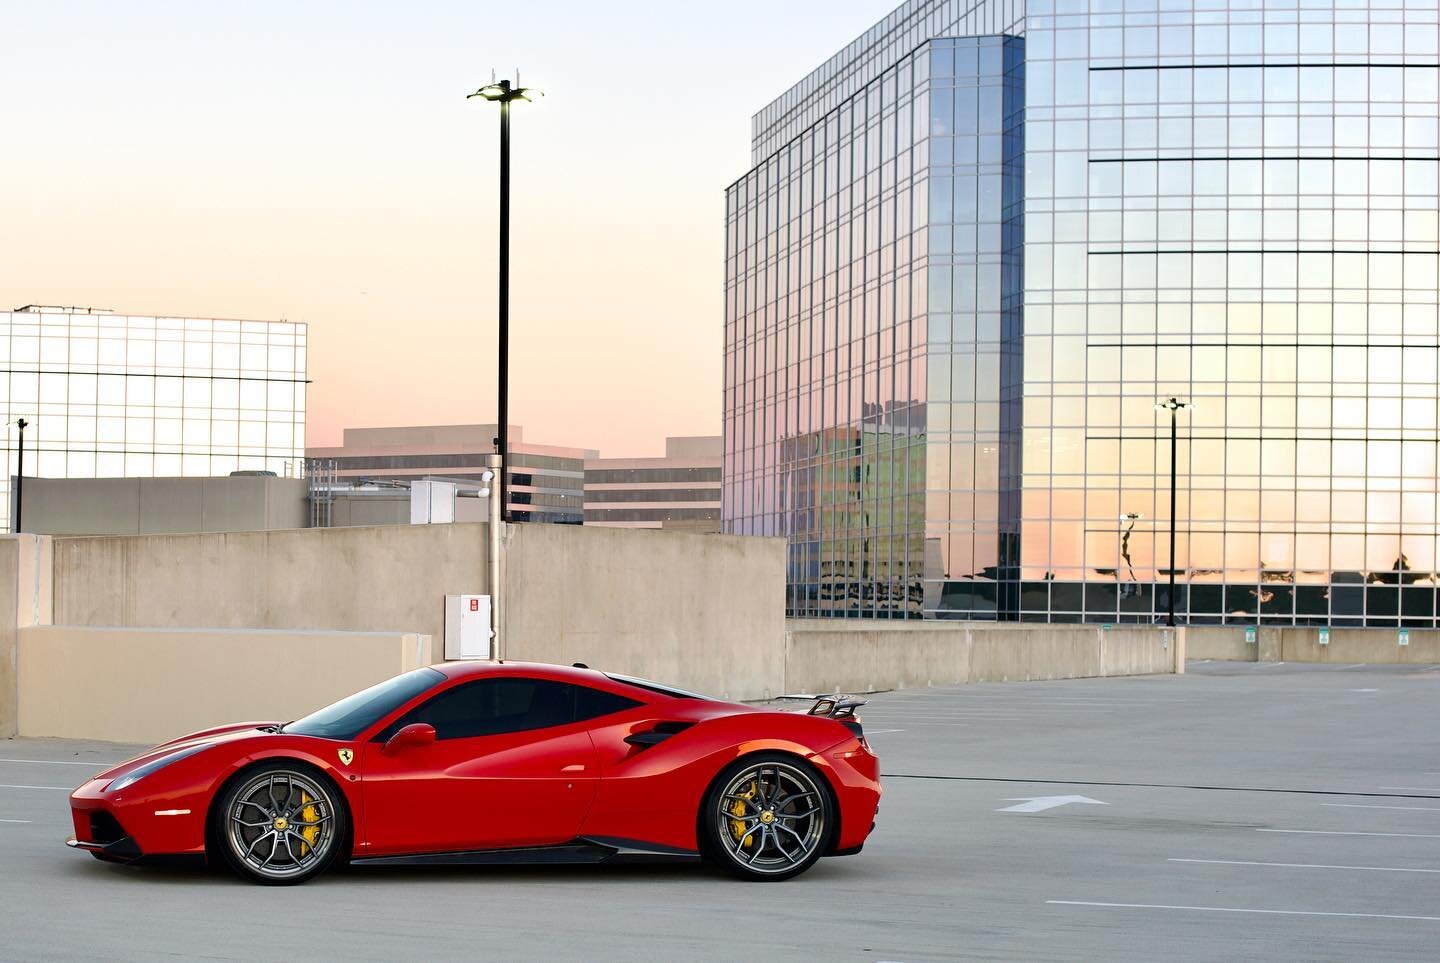 A Ferrari 488 dressed to impress, with Akrapovic titanium exhaust, forged aluminum ANRKY wheels, and Novitec carbon fiber aerodynamics, this beast is ready to dominate the roads. 

Excitement levels through the roof! 

#Ferrari488 #AkrapovicExhaust #